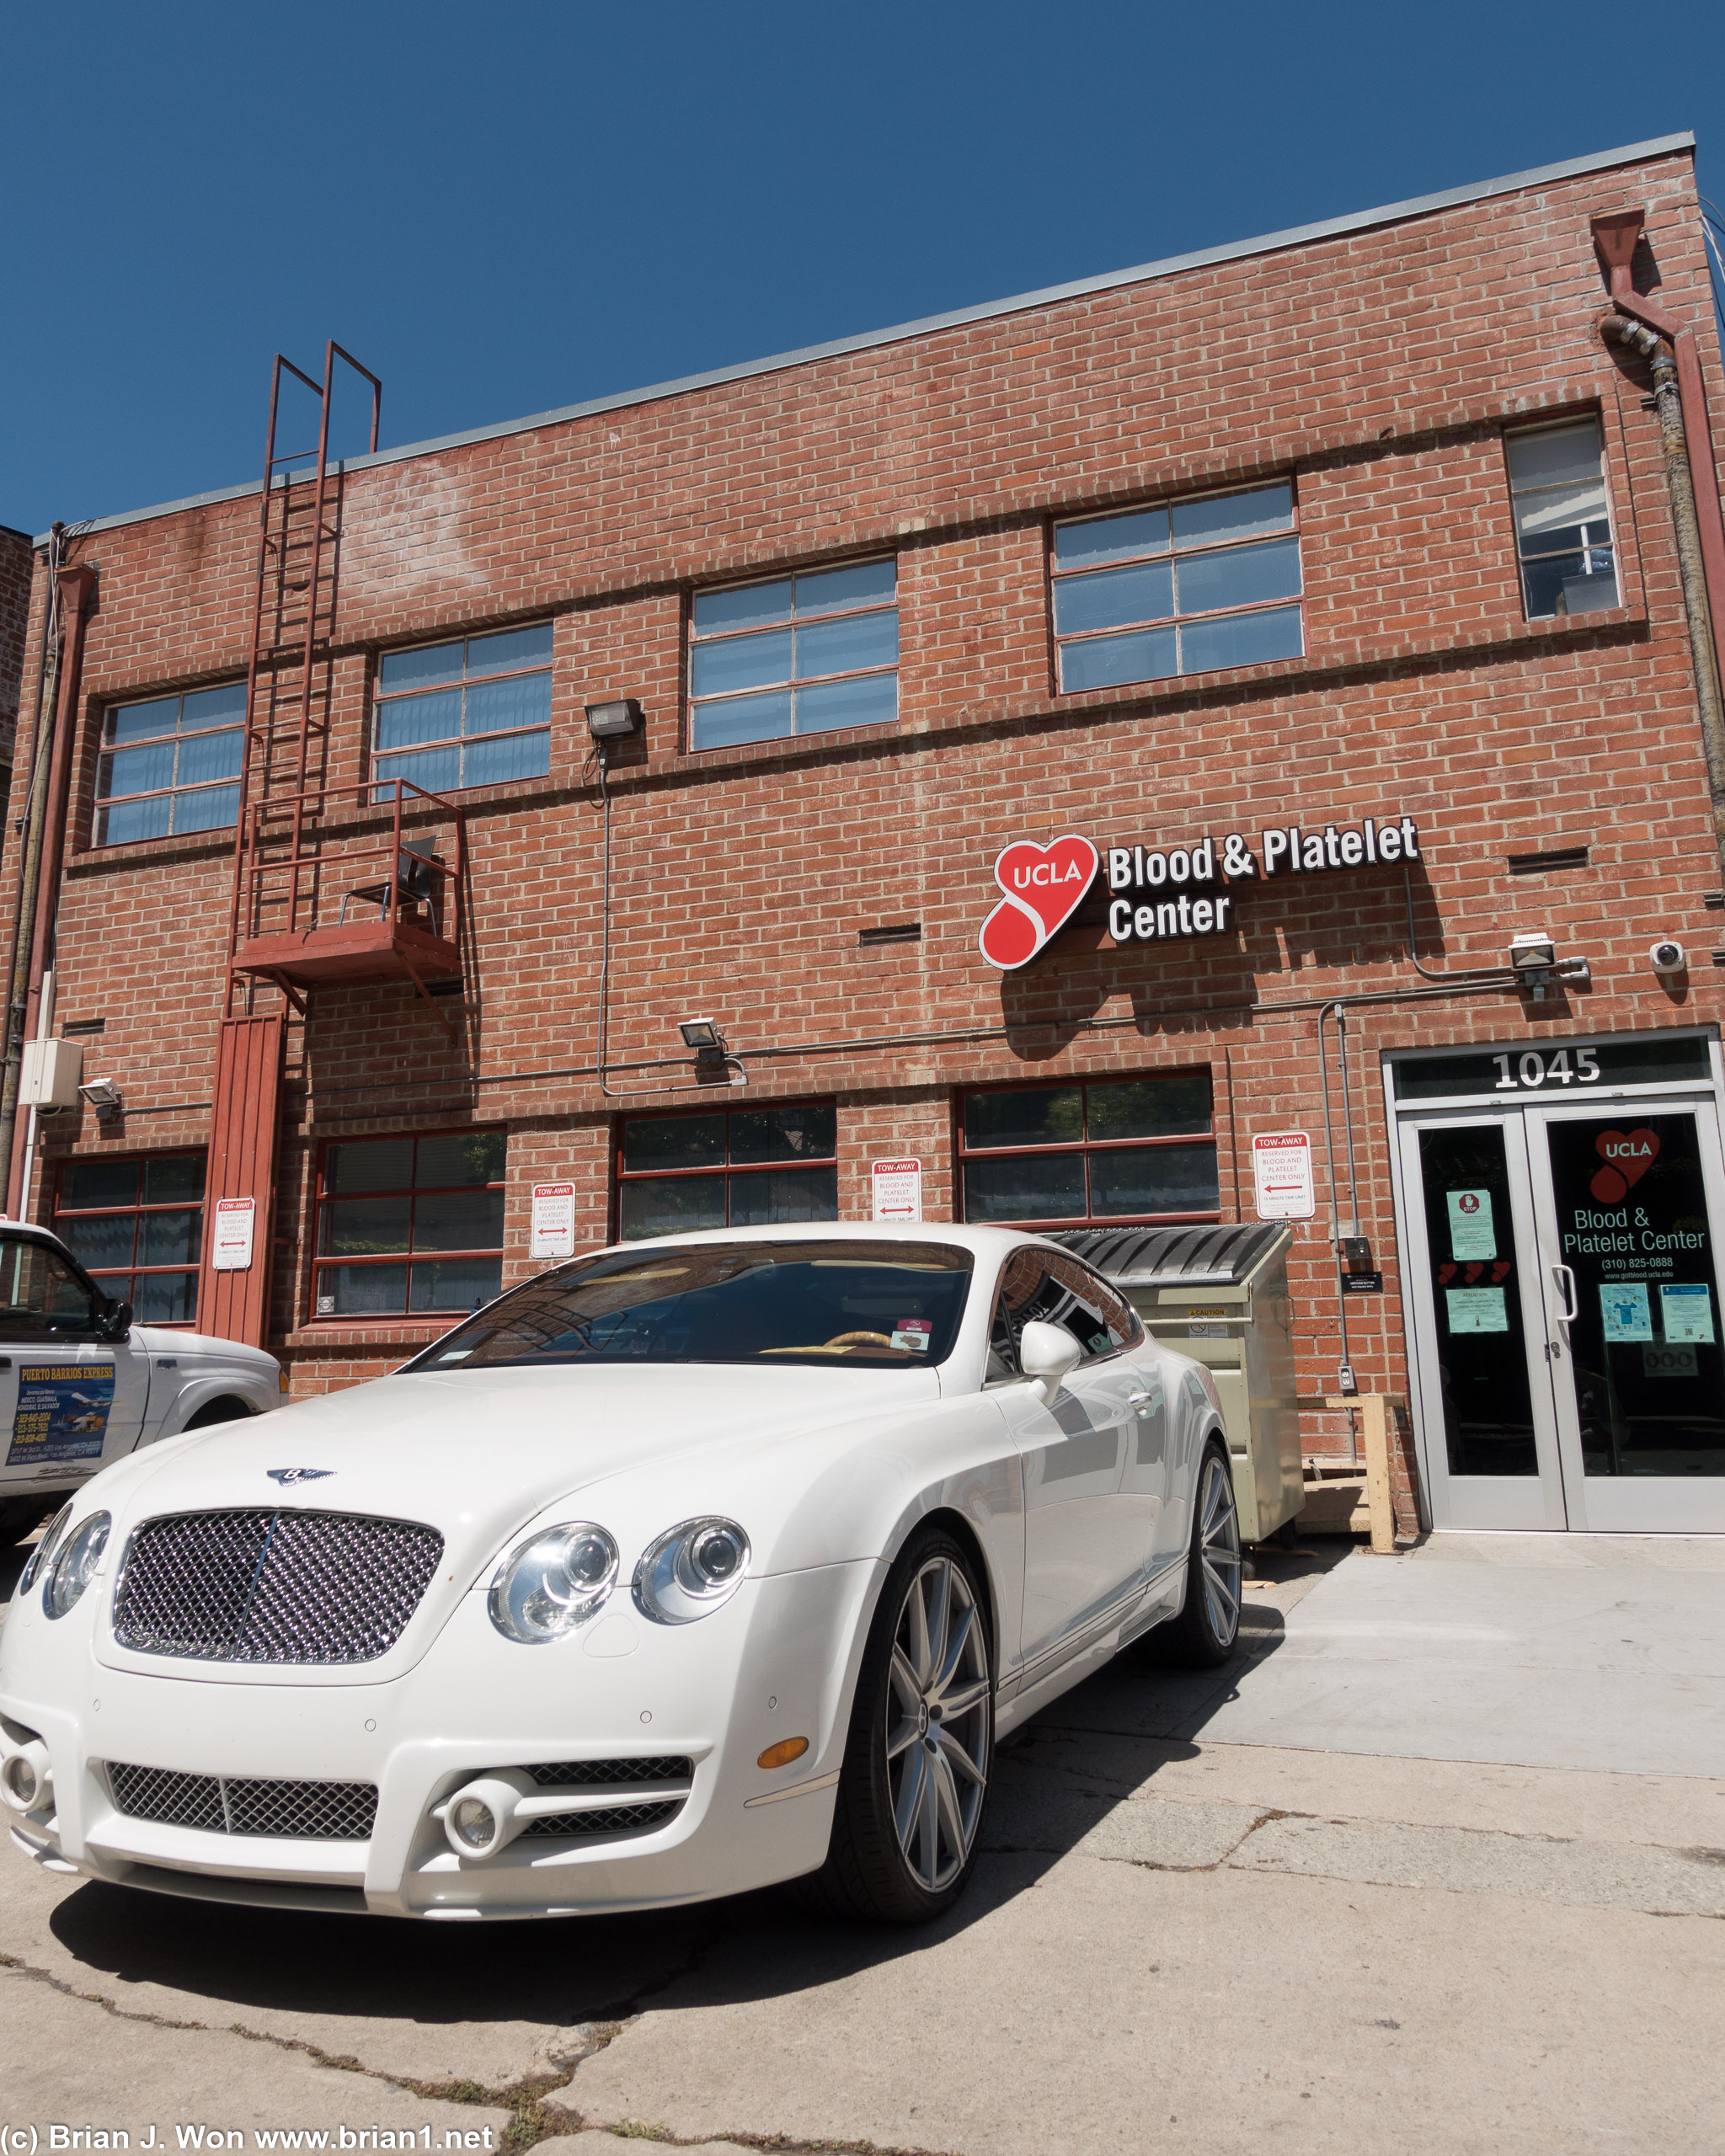 Do you get a free Bentley if you give blood?